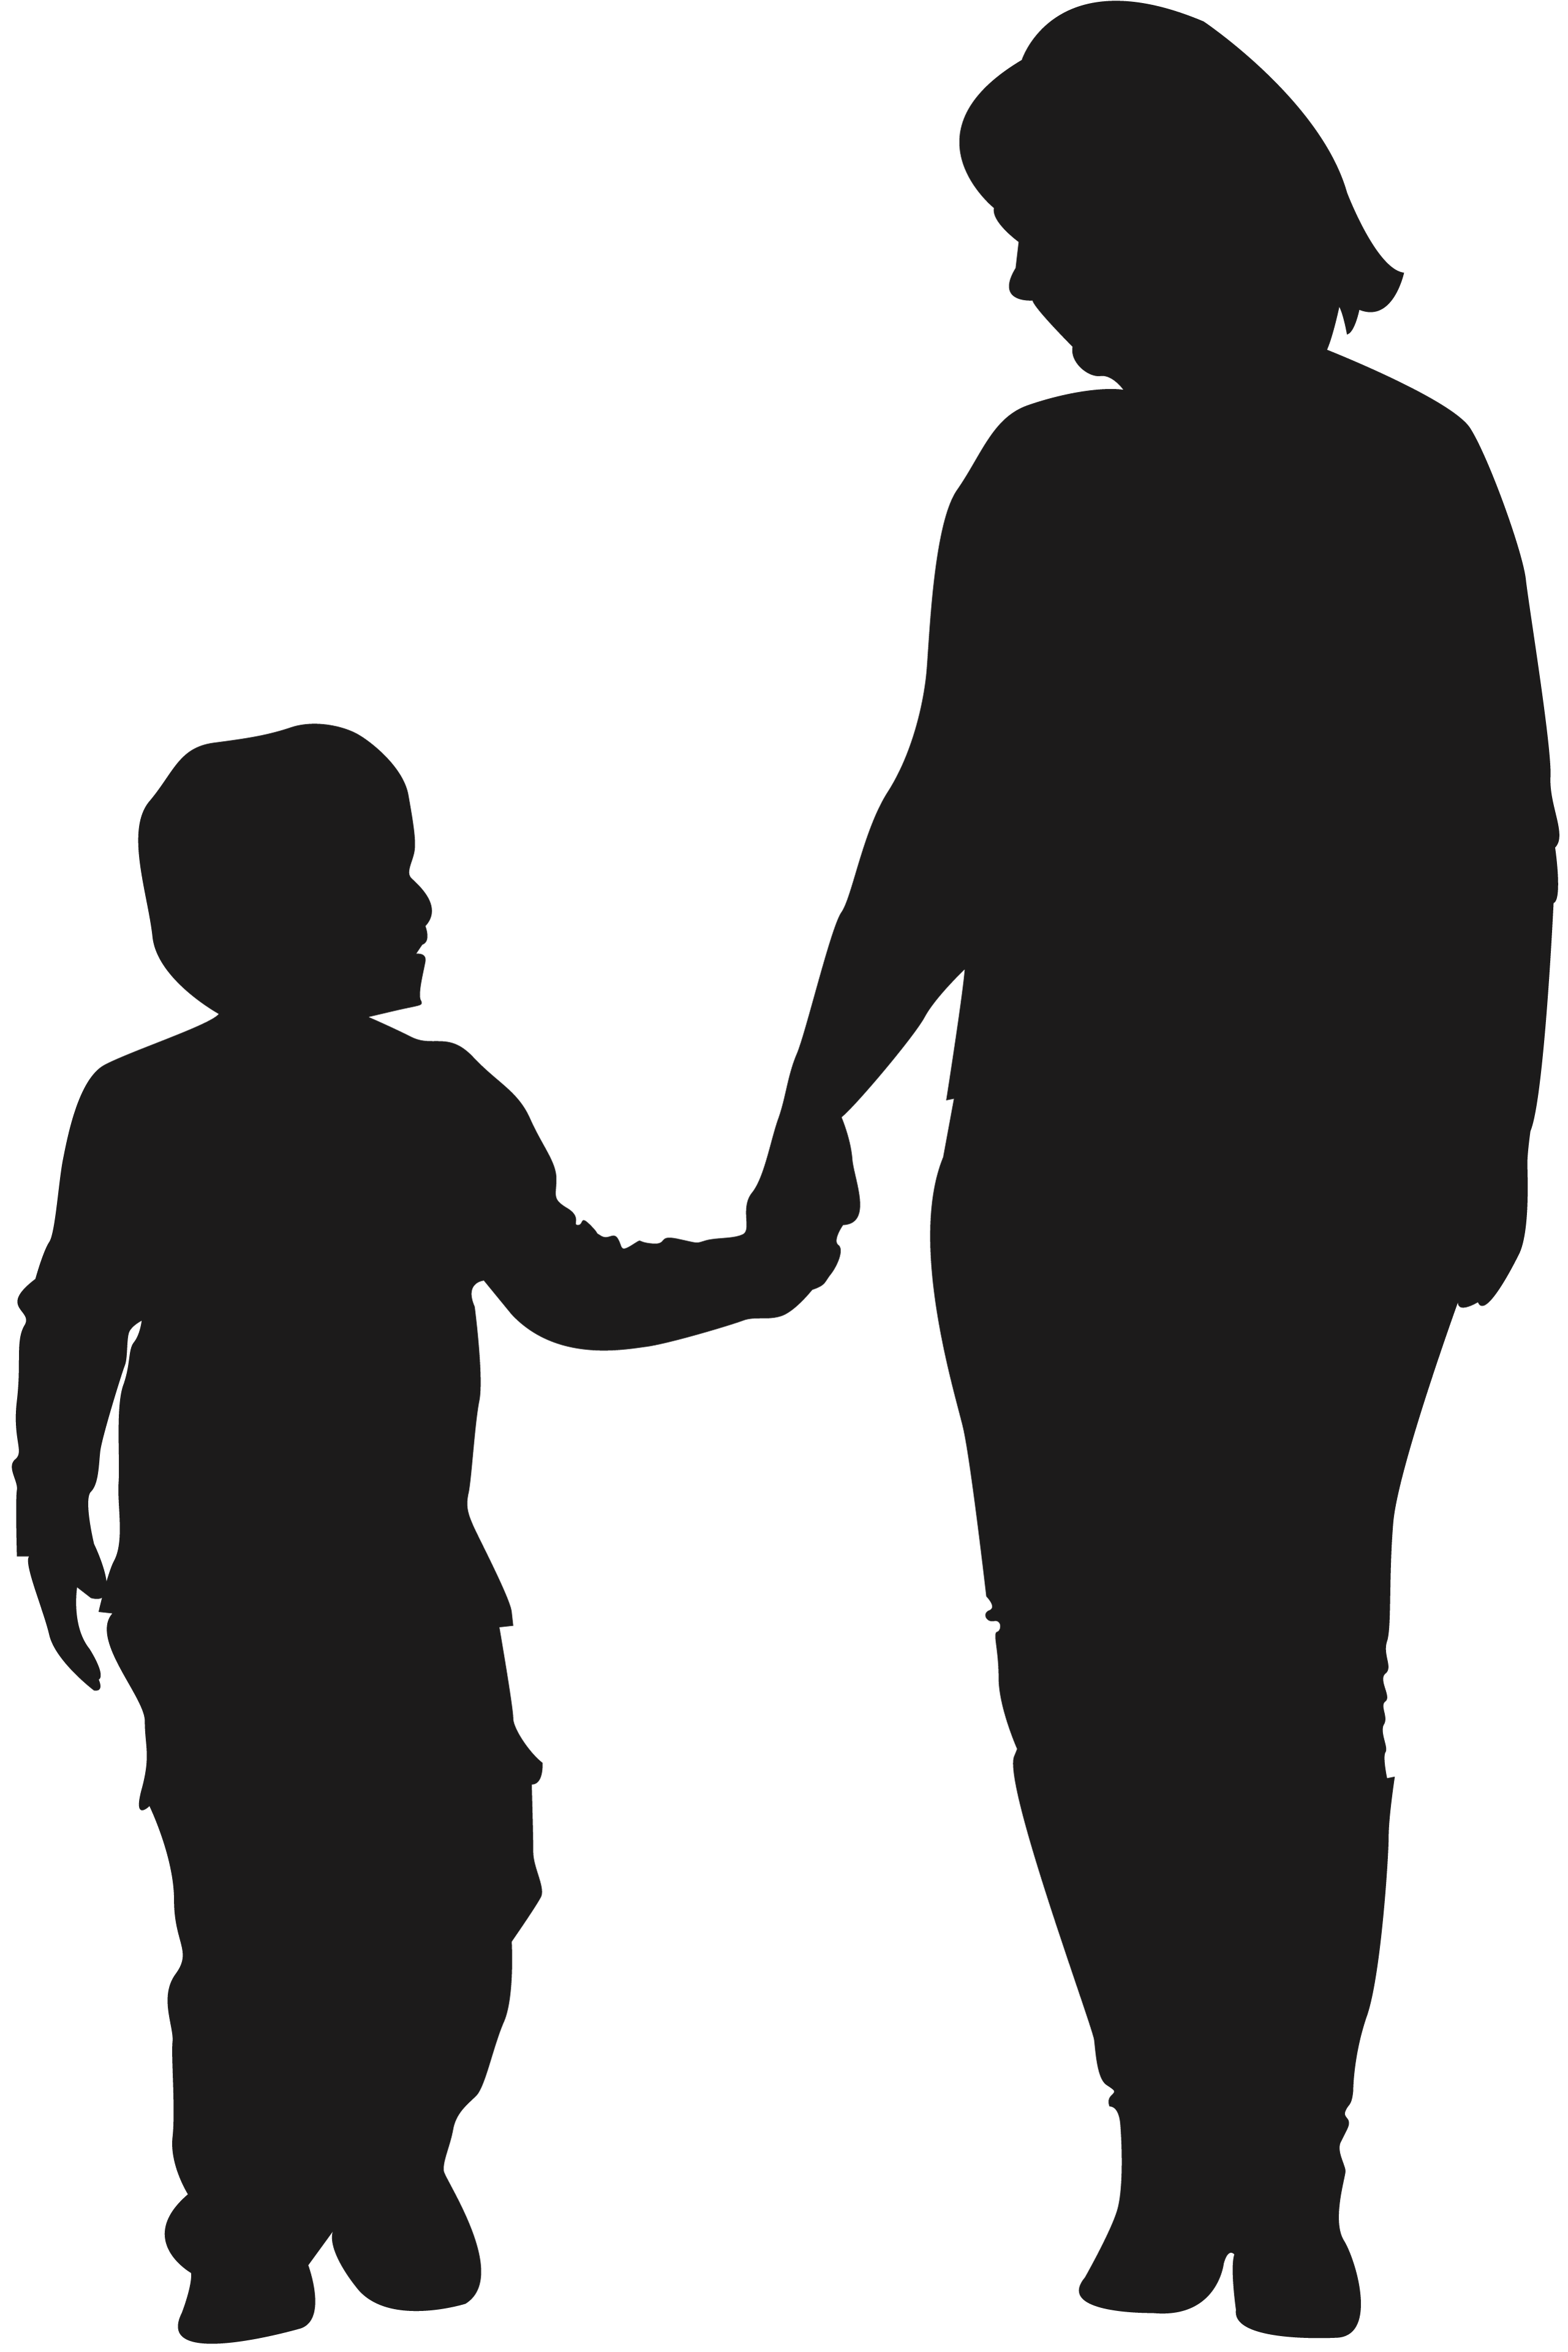 Father Mother And Son Silhouette Svg Png Icon Free Download Sexiz Pix